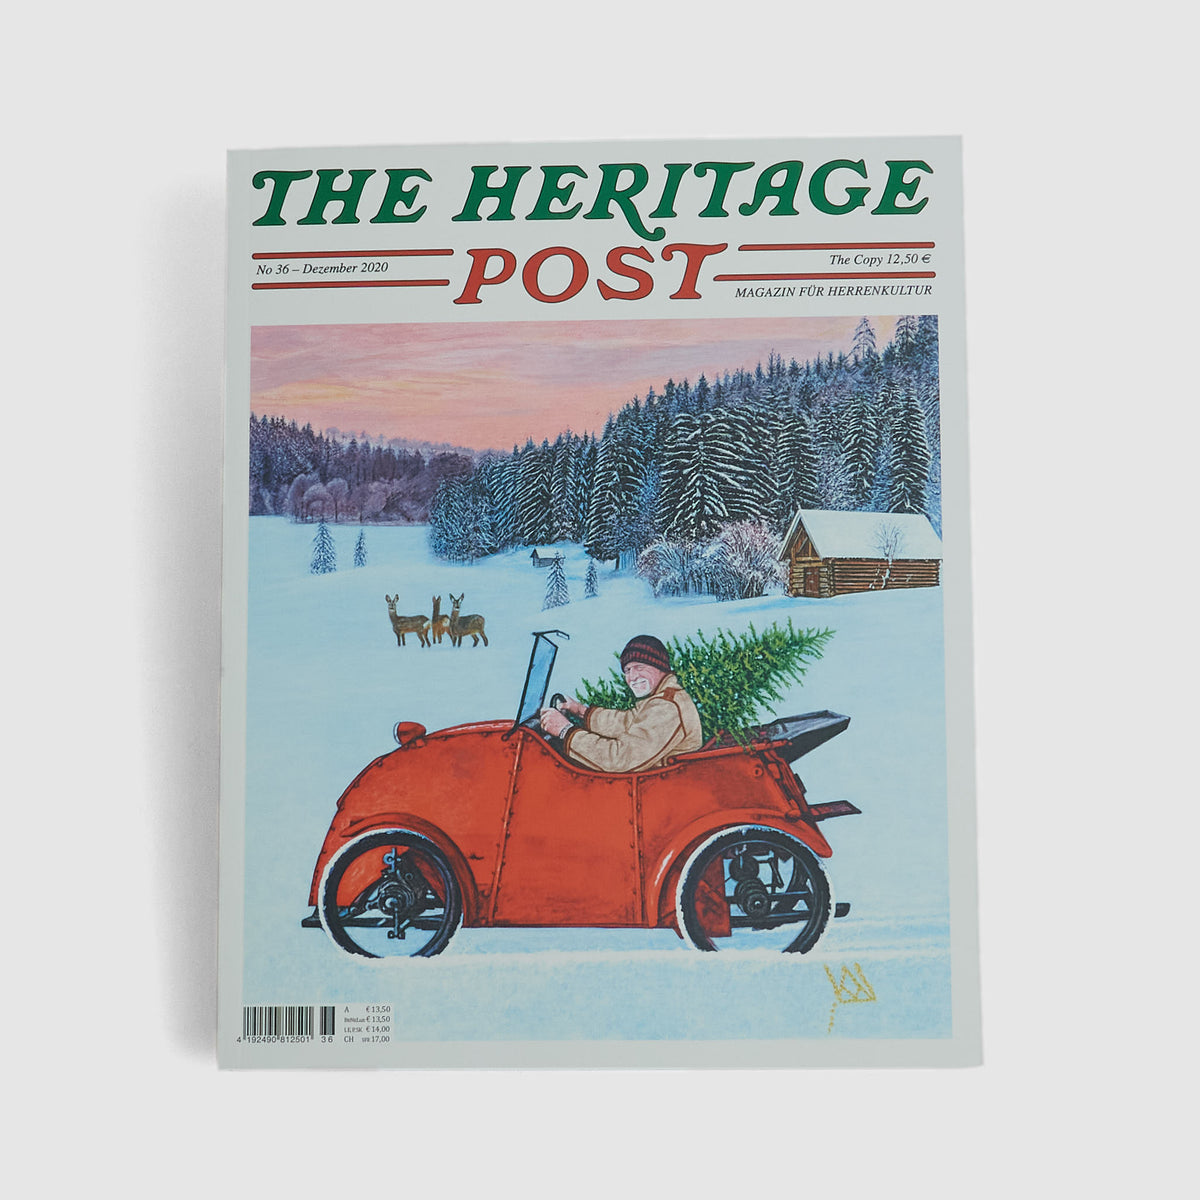 The Heritage Post No. 36